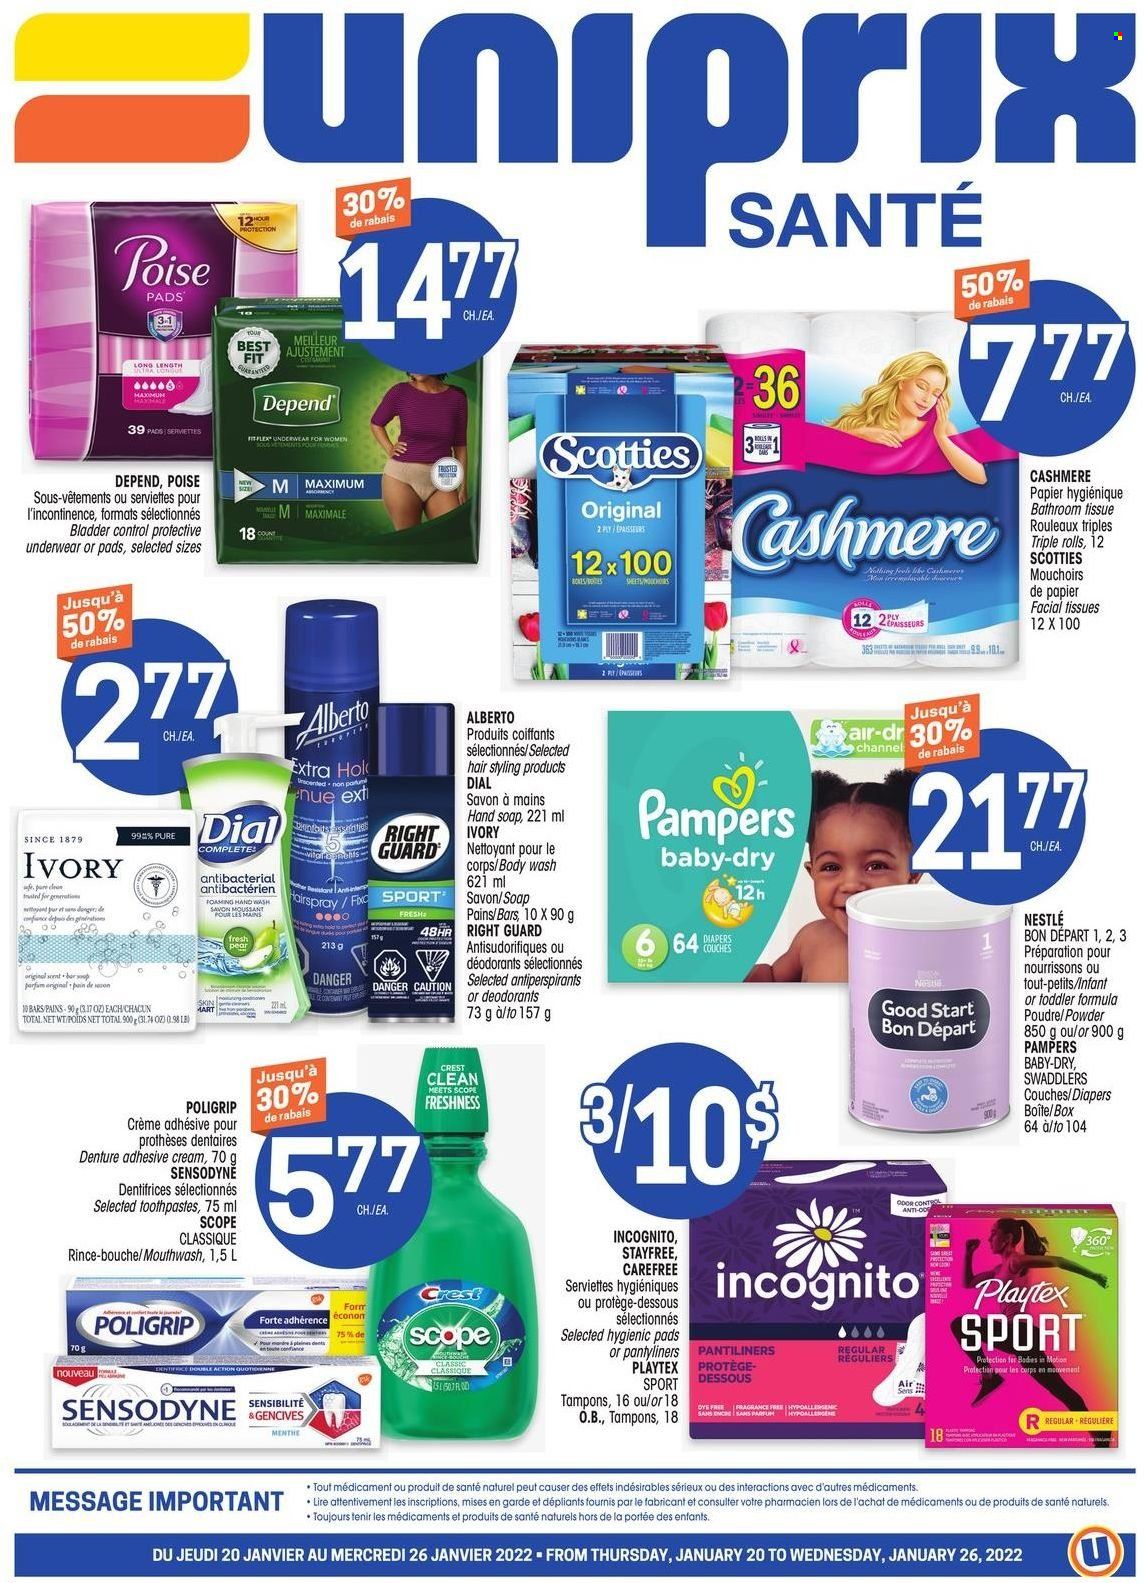 thumbnail - Uniprix Santé Flyer - January 20, 2022 - January 26, 2022 - Sales products - nappies, bath tissue, body wash, hand soap, Dial, soap, mouthwash, Crest, Stayfree, Playtex, pantiliners, Carefree, pantyliners, tampons, facial tissues, fragrance, Nestlé, Pampers, Sensodyne, deodorant. Page 1.